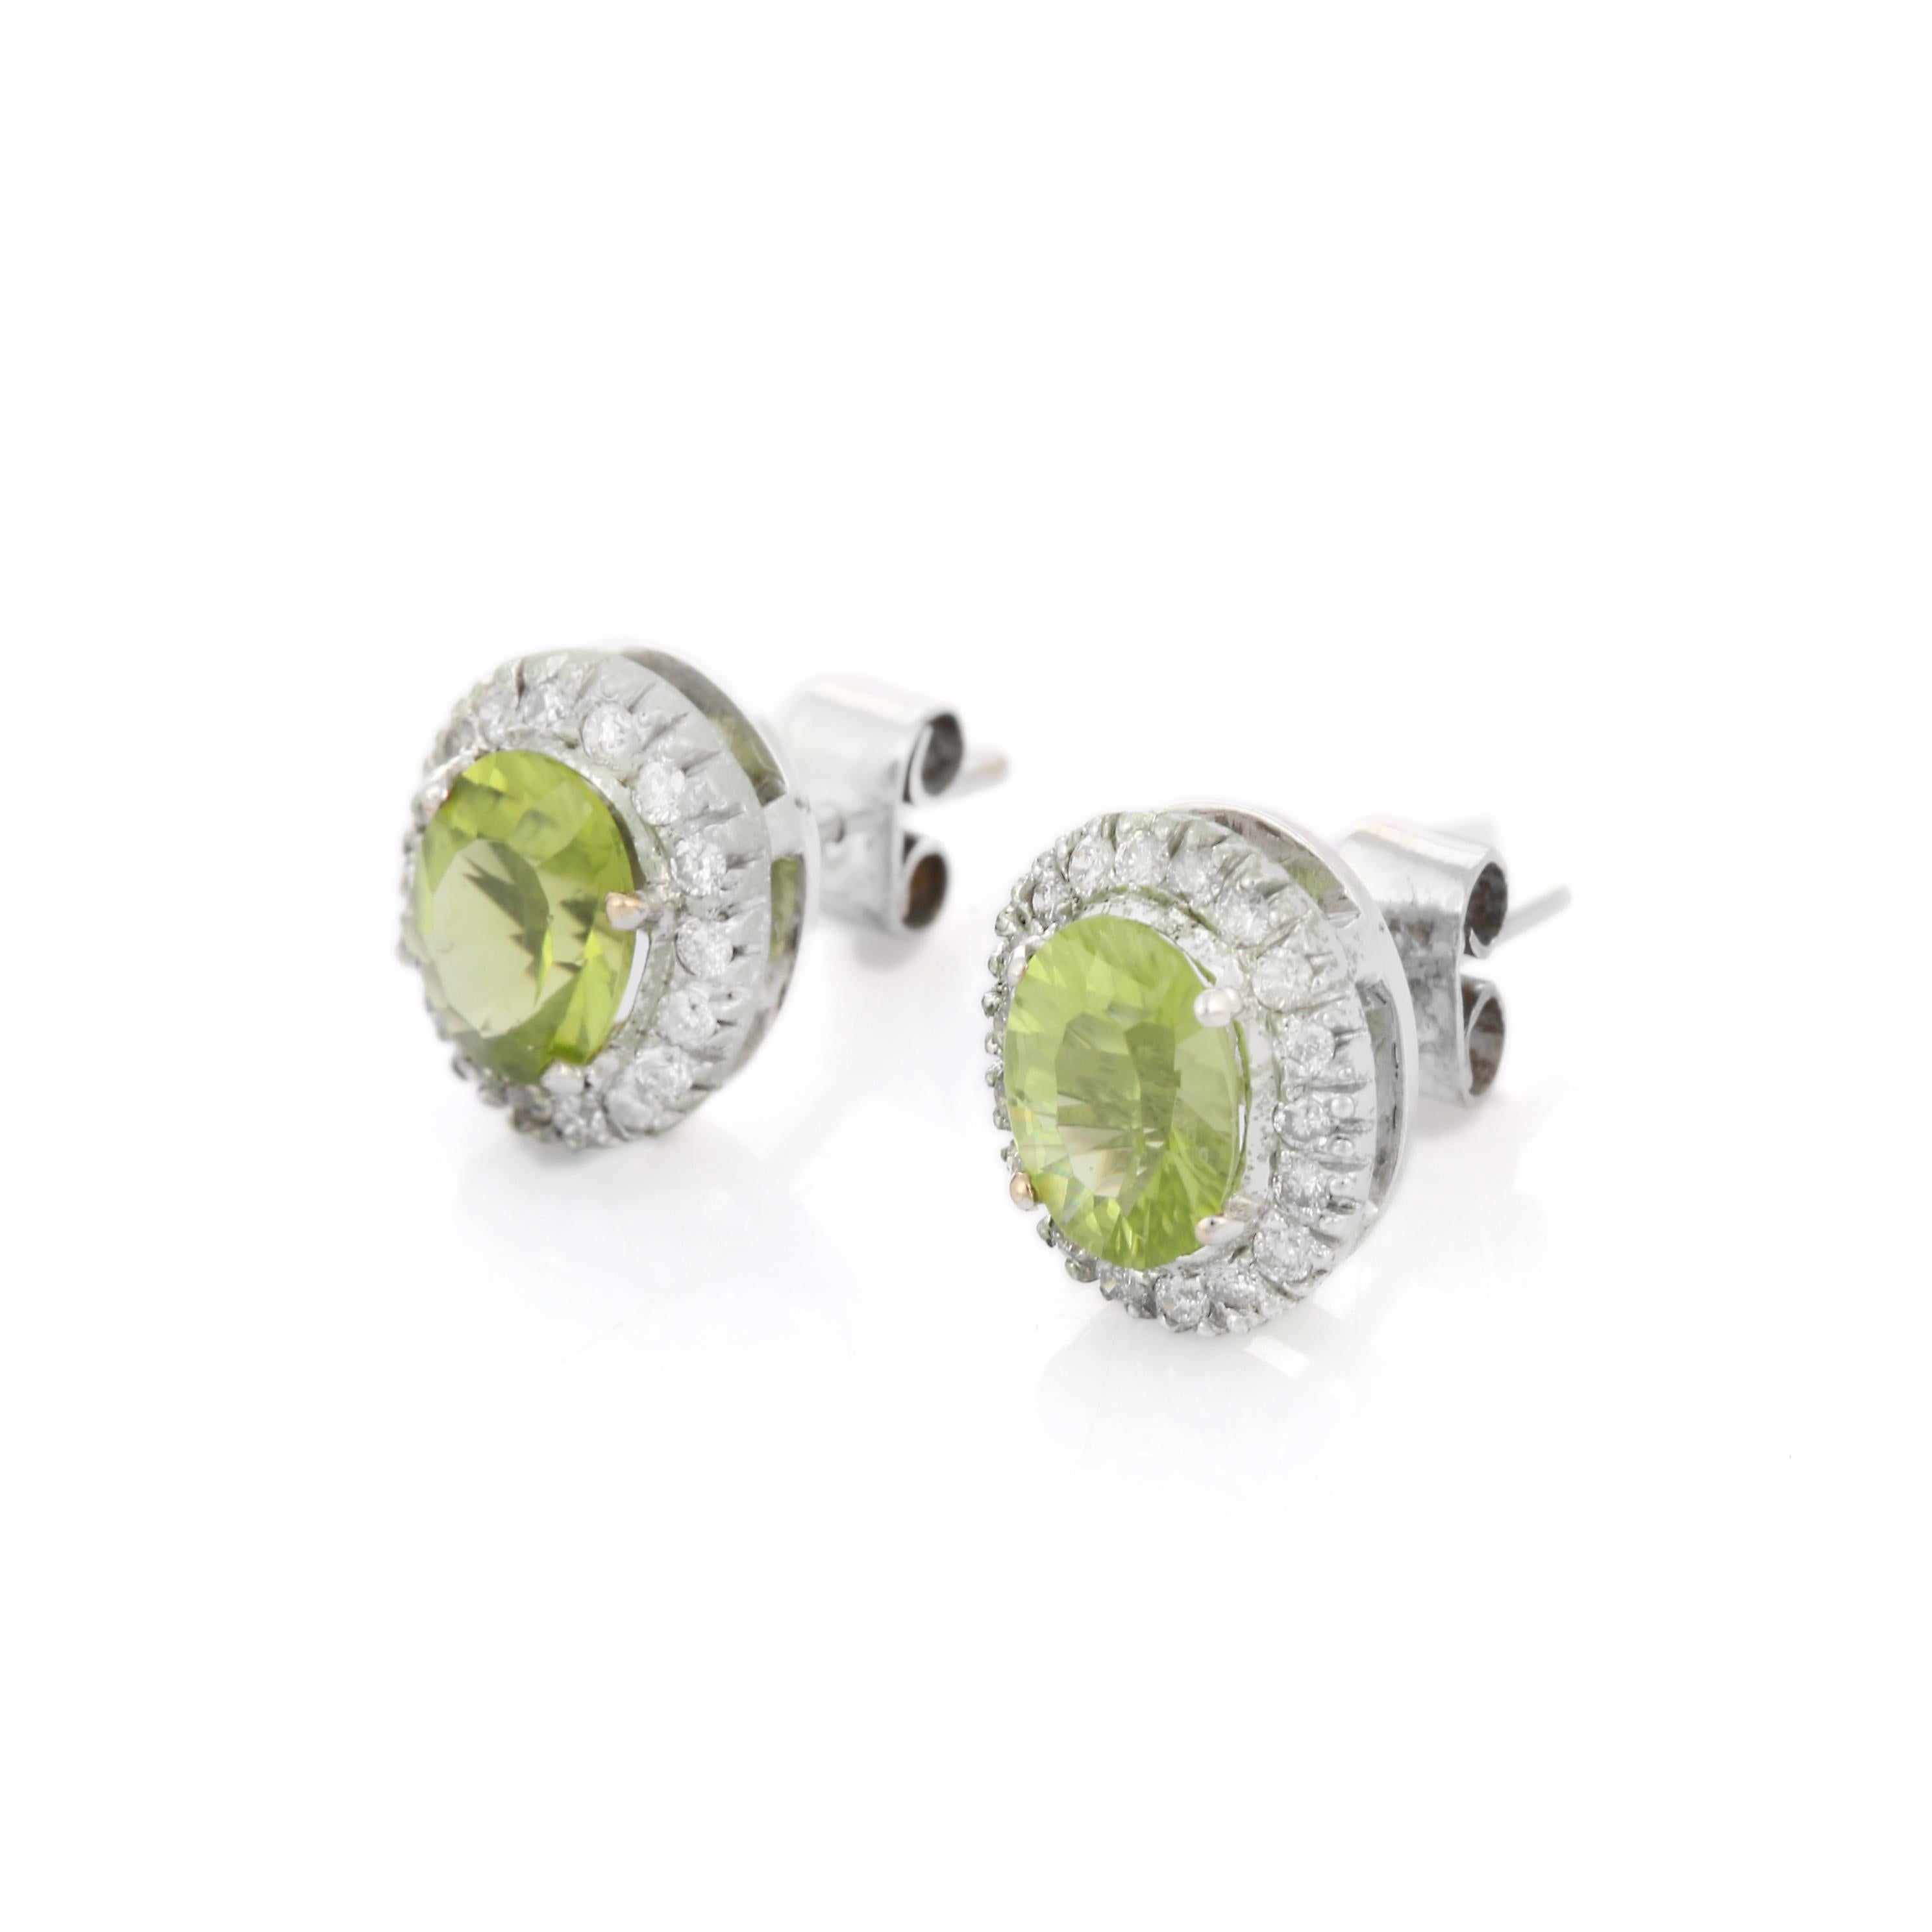 Studs create a subtle beauty while showcasing the colors of the natural precious gemstones and illuminating diamonds making a statement.

Oval cut peridot studs with diamonds in 18K gold. Embrace your look with these stunning pair of earrings